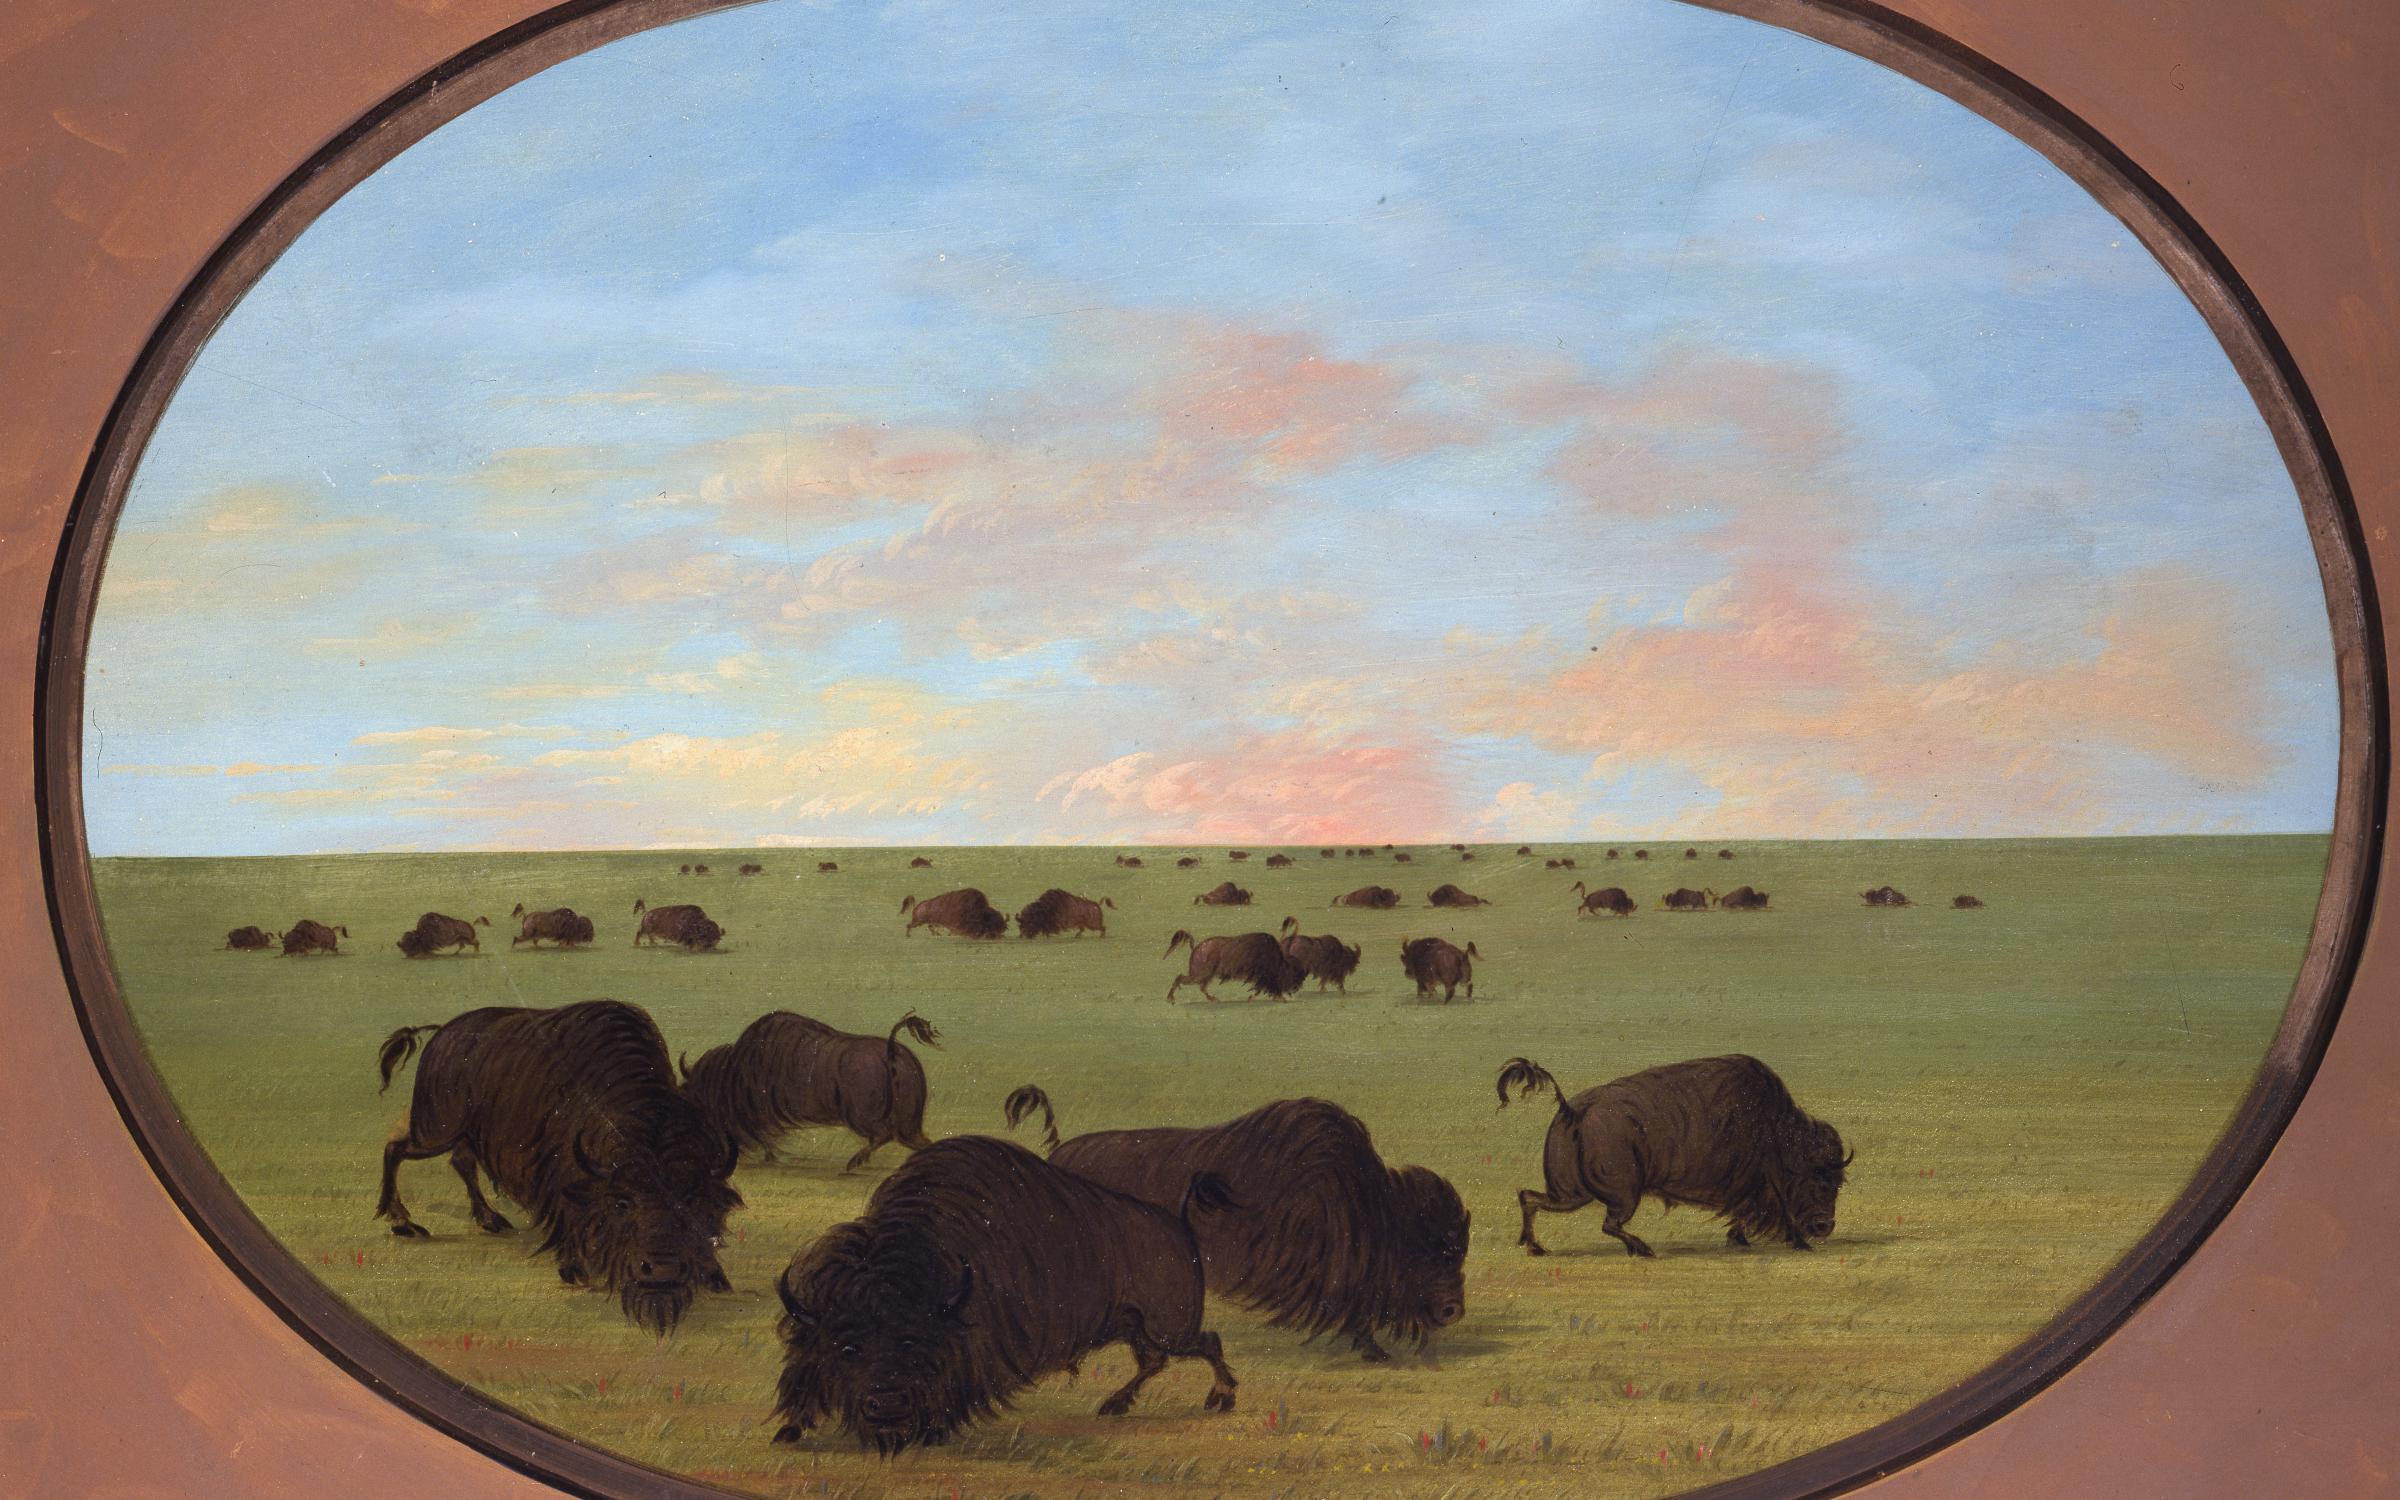 George Catlin (American, 1796-1872), Buffaloes (Bulls and Cows) Grazing in the Prairie, ca. 1855-1870, oil on paperboard, 23 x 28.125 inches (frame), Buffalo Bill Center of the West, Cody, Wyoming, USA, gift of Paul Mellon, 27.86